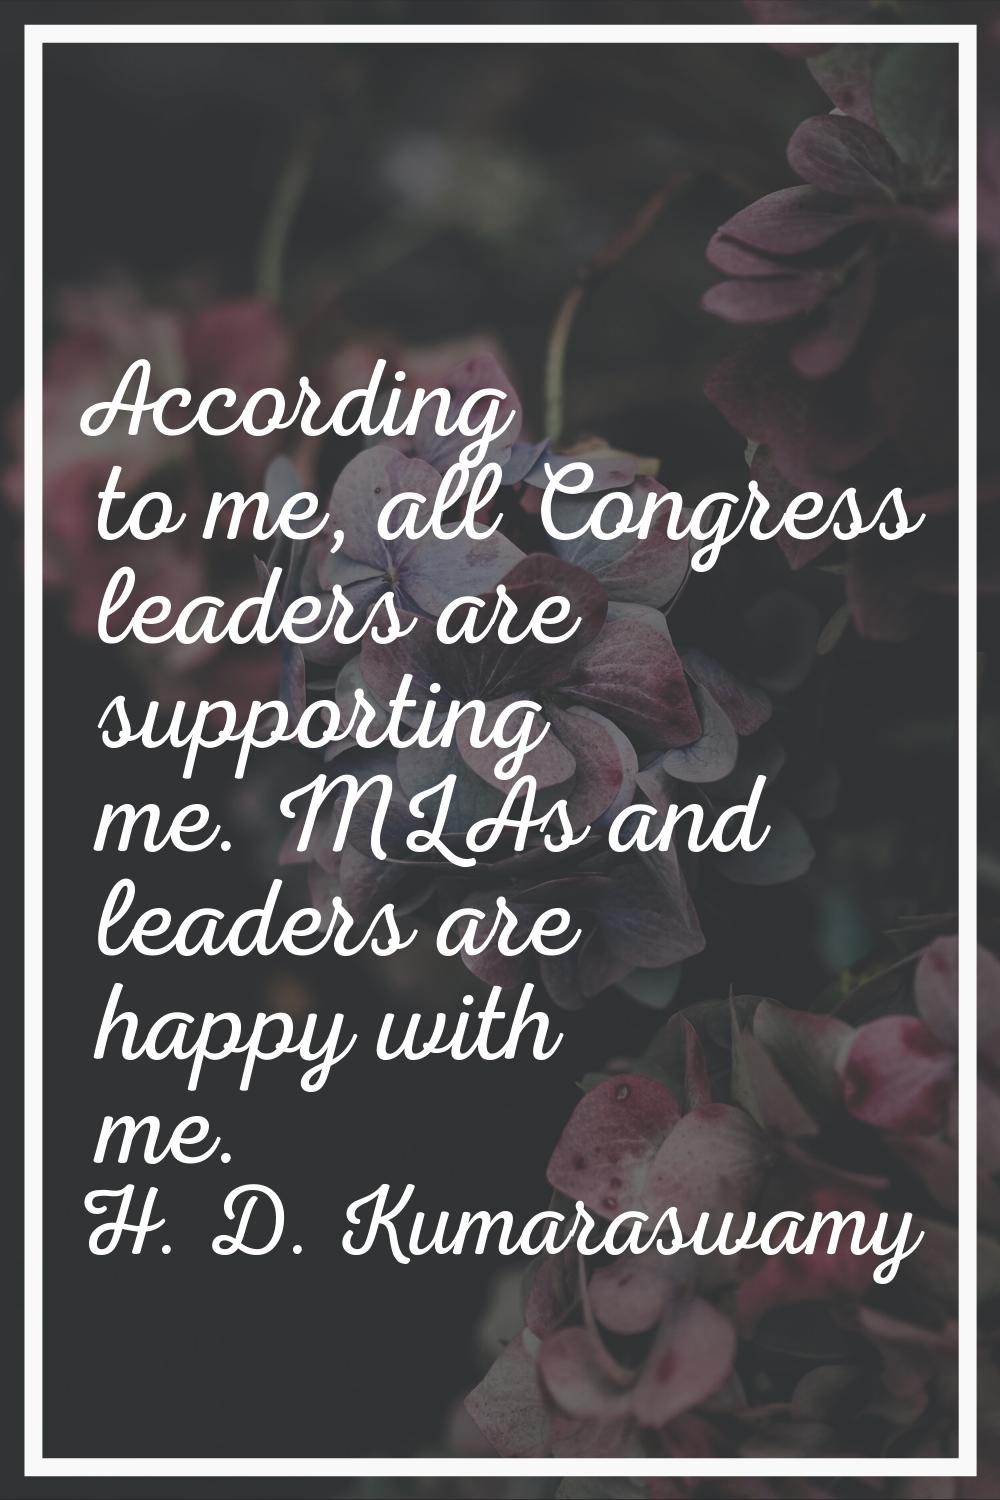 According to me, all Congress leaders are supporting me. MLAs and leaders are happy with me.